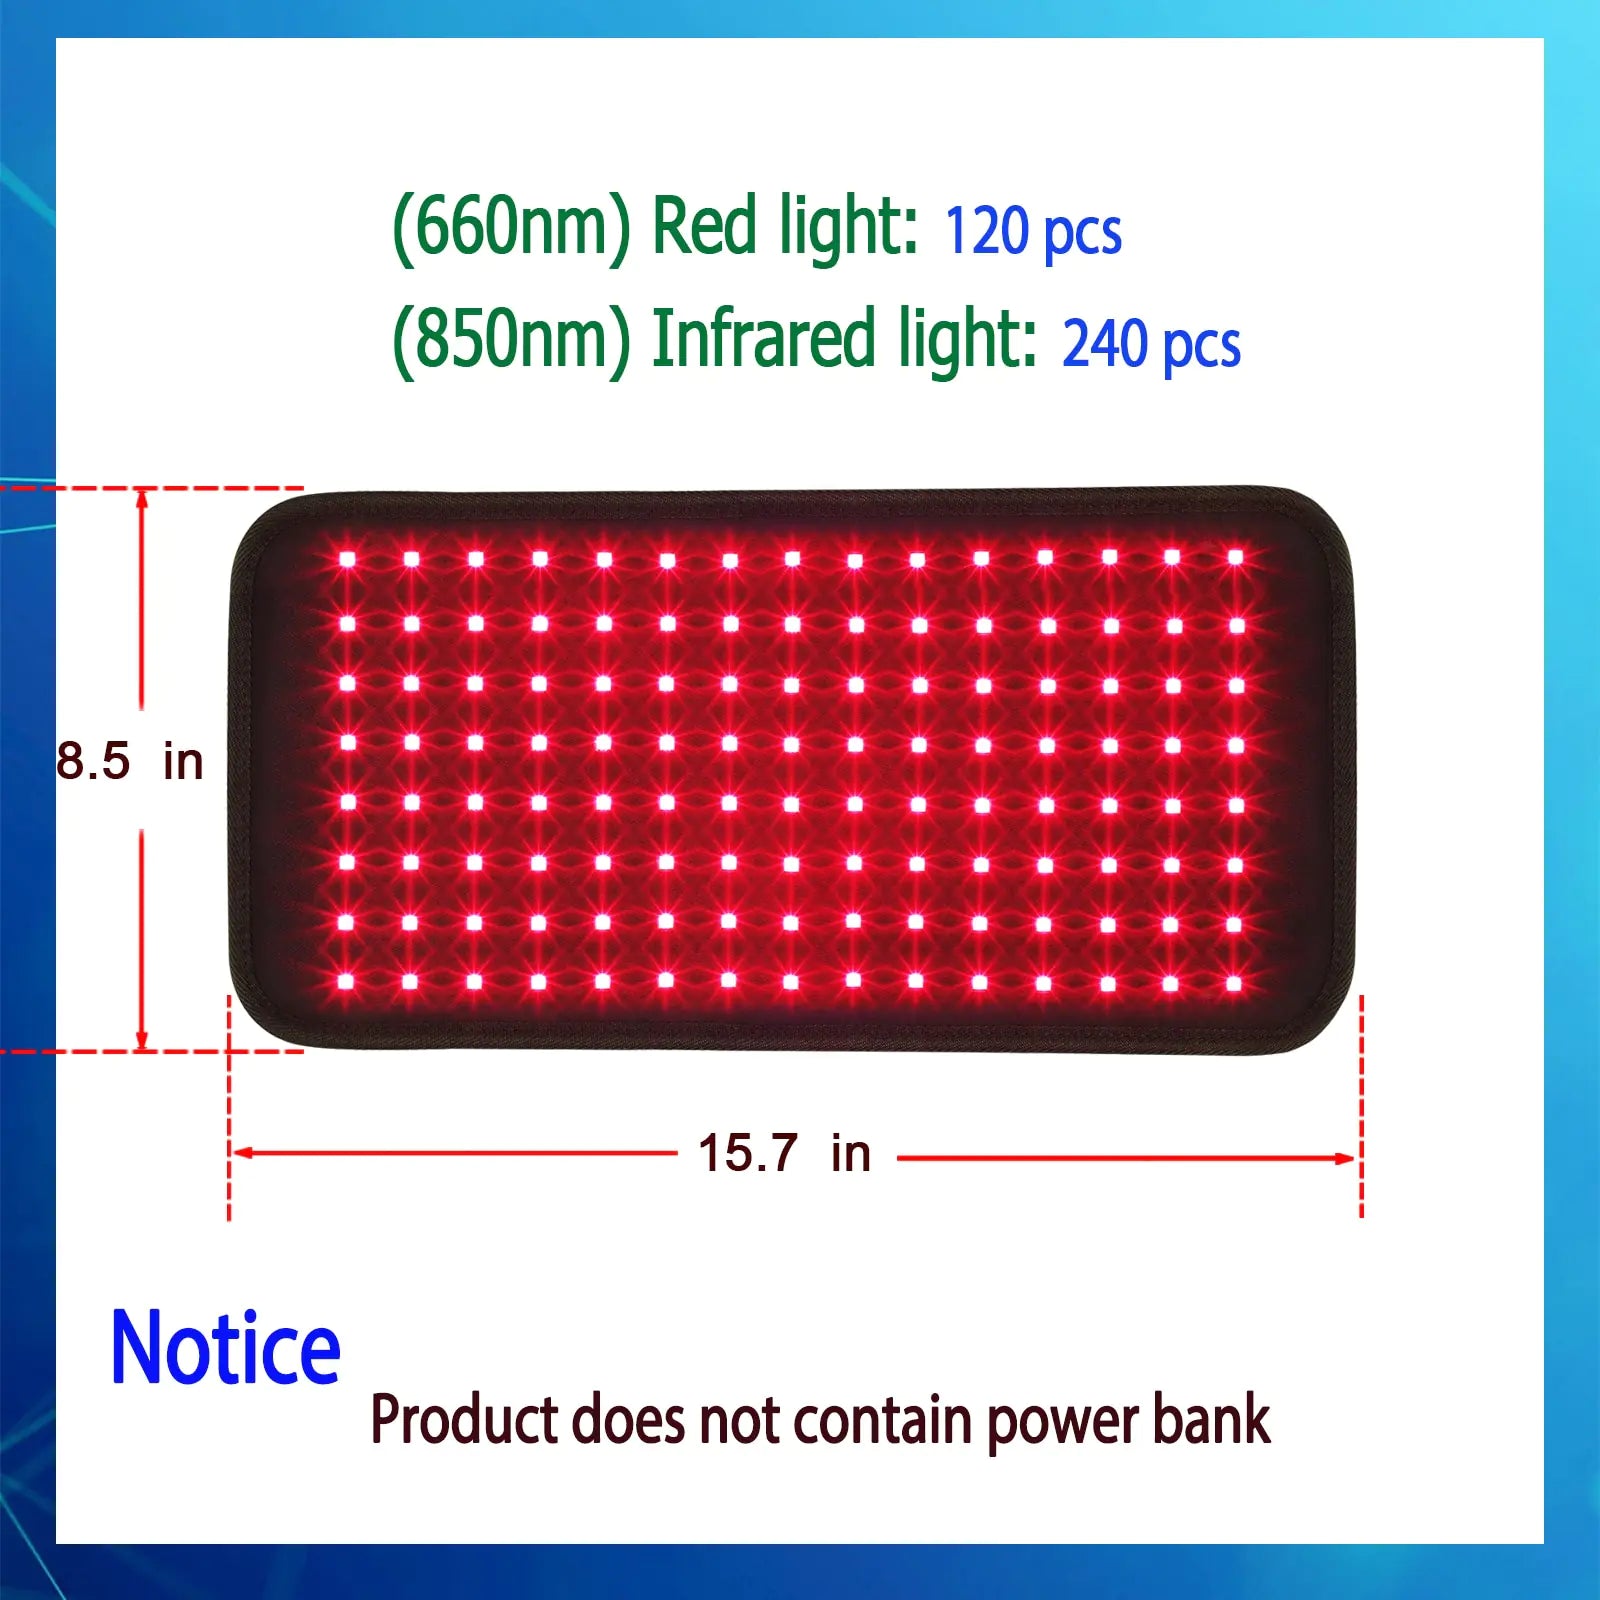 Infrared Light Therapy Multi-Functional Belt